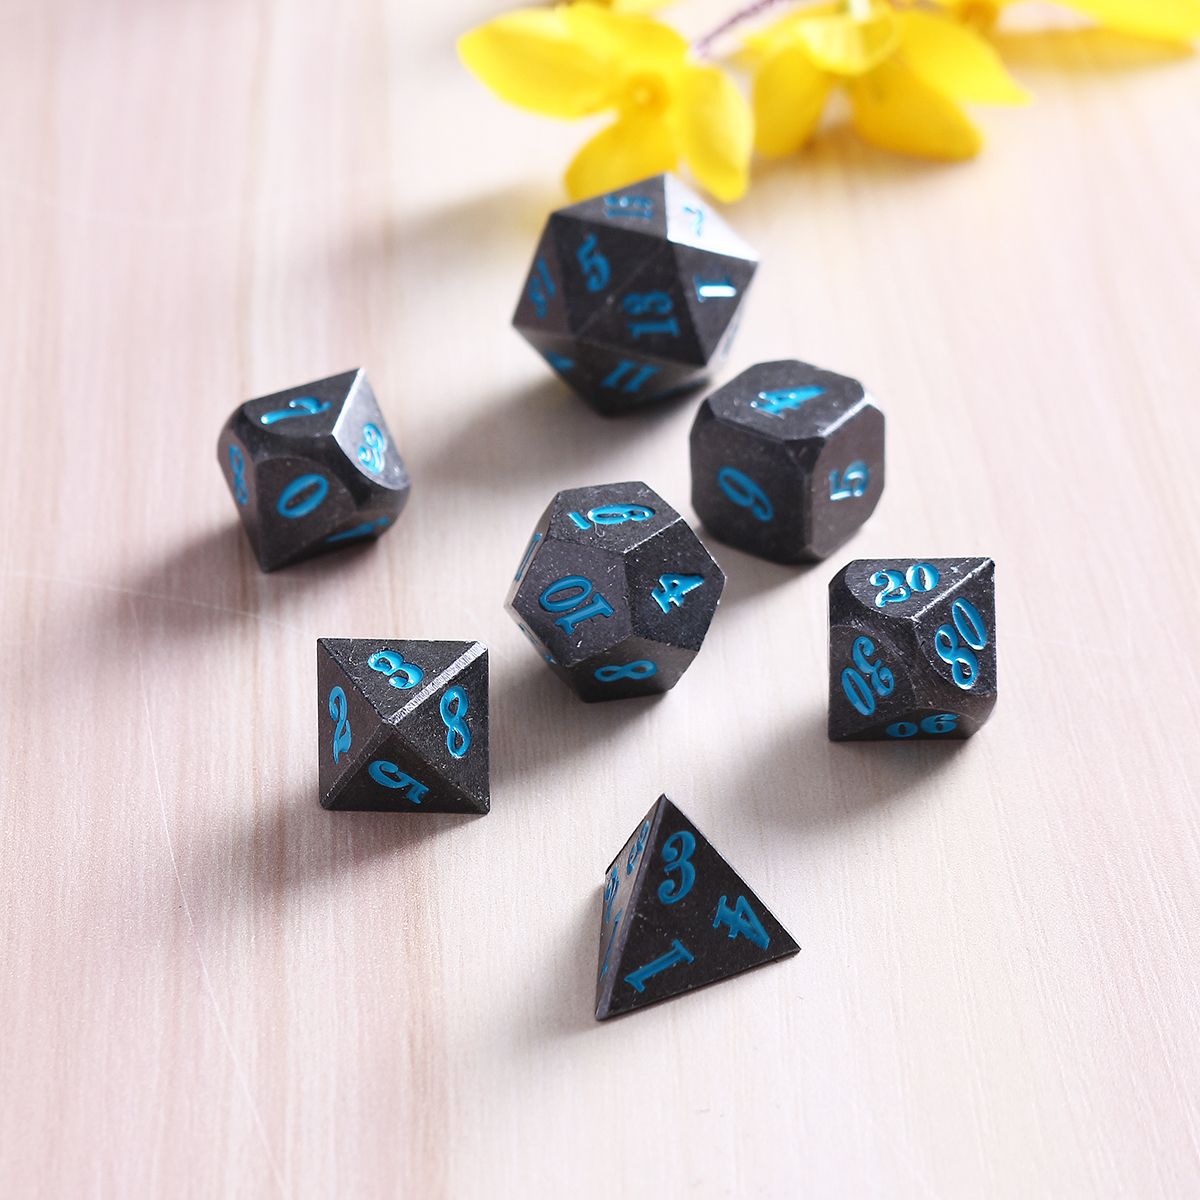 Antique-Metal-7-Pcs-Multisided-Dice-Heavy-Metal-Polyhedral-Dices-Set-w-Bag-1292360